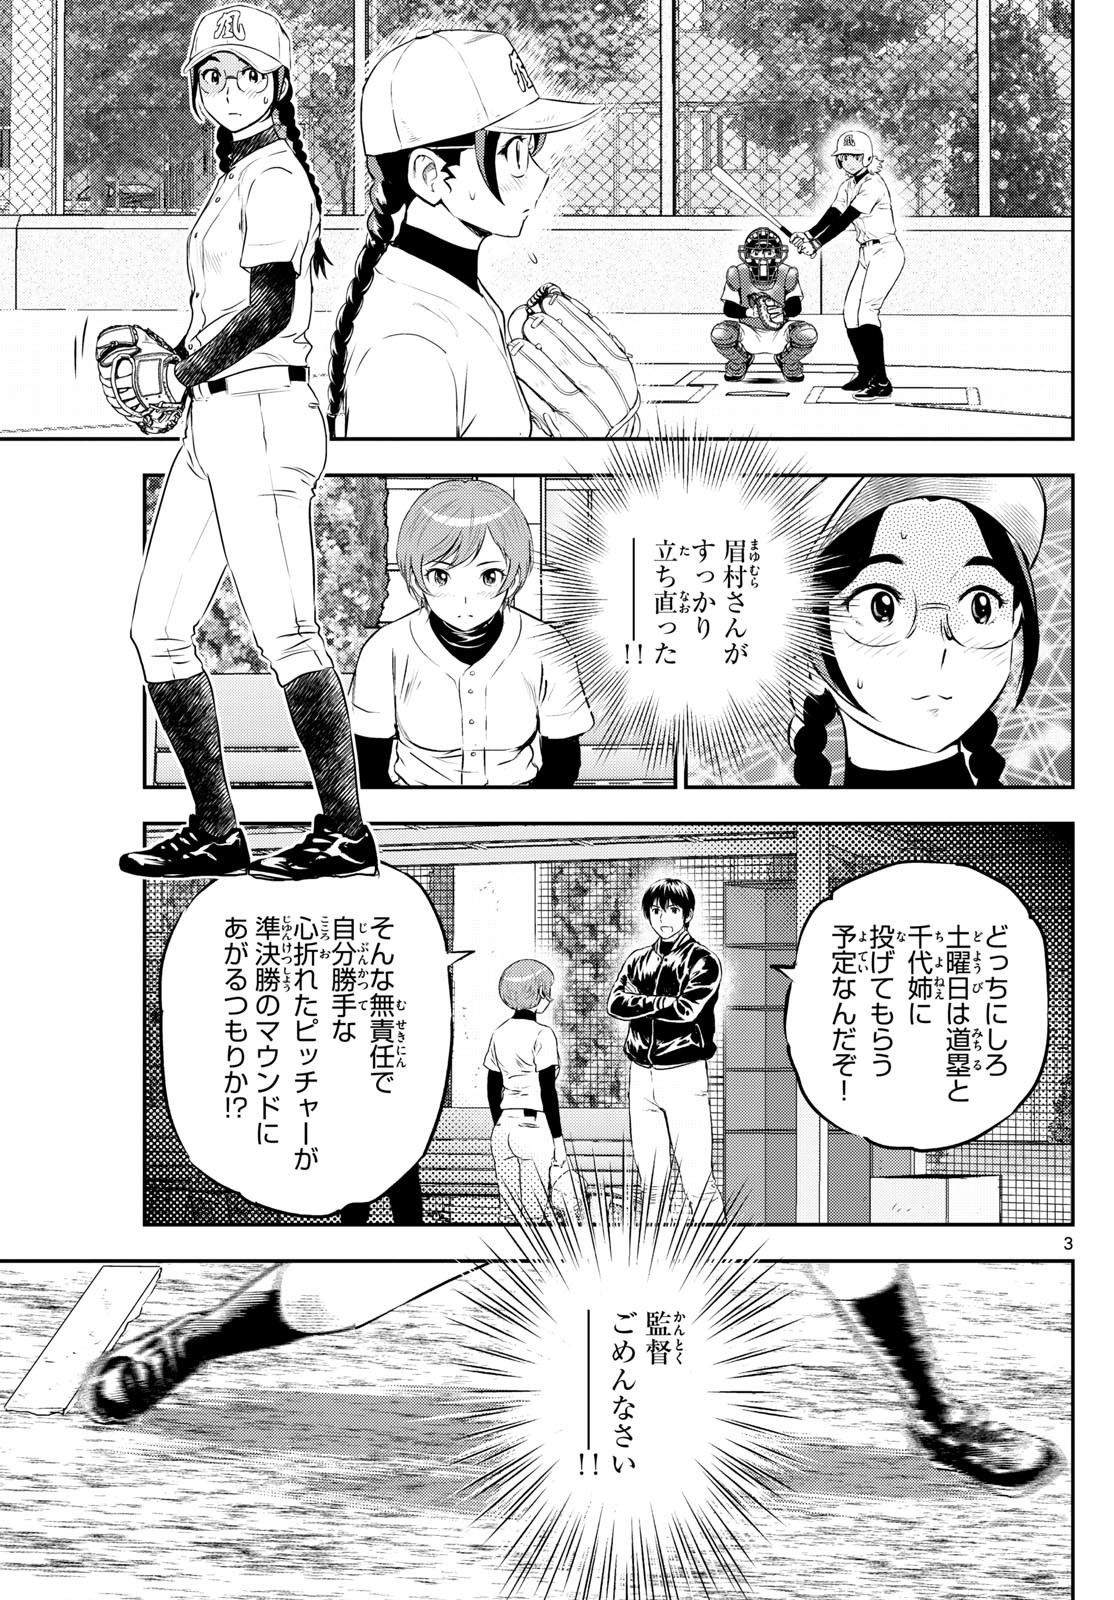 Major 2nd - メジャーセカンド - Chapter 282 - Page 3